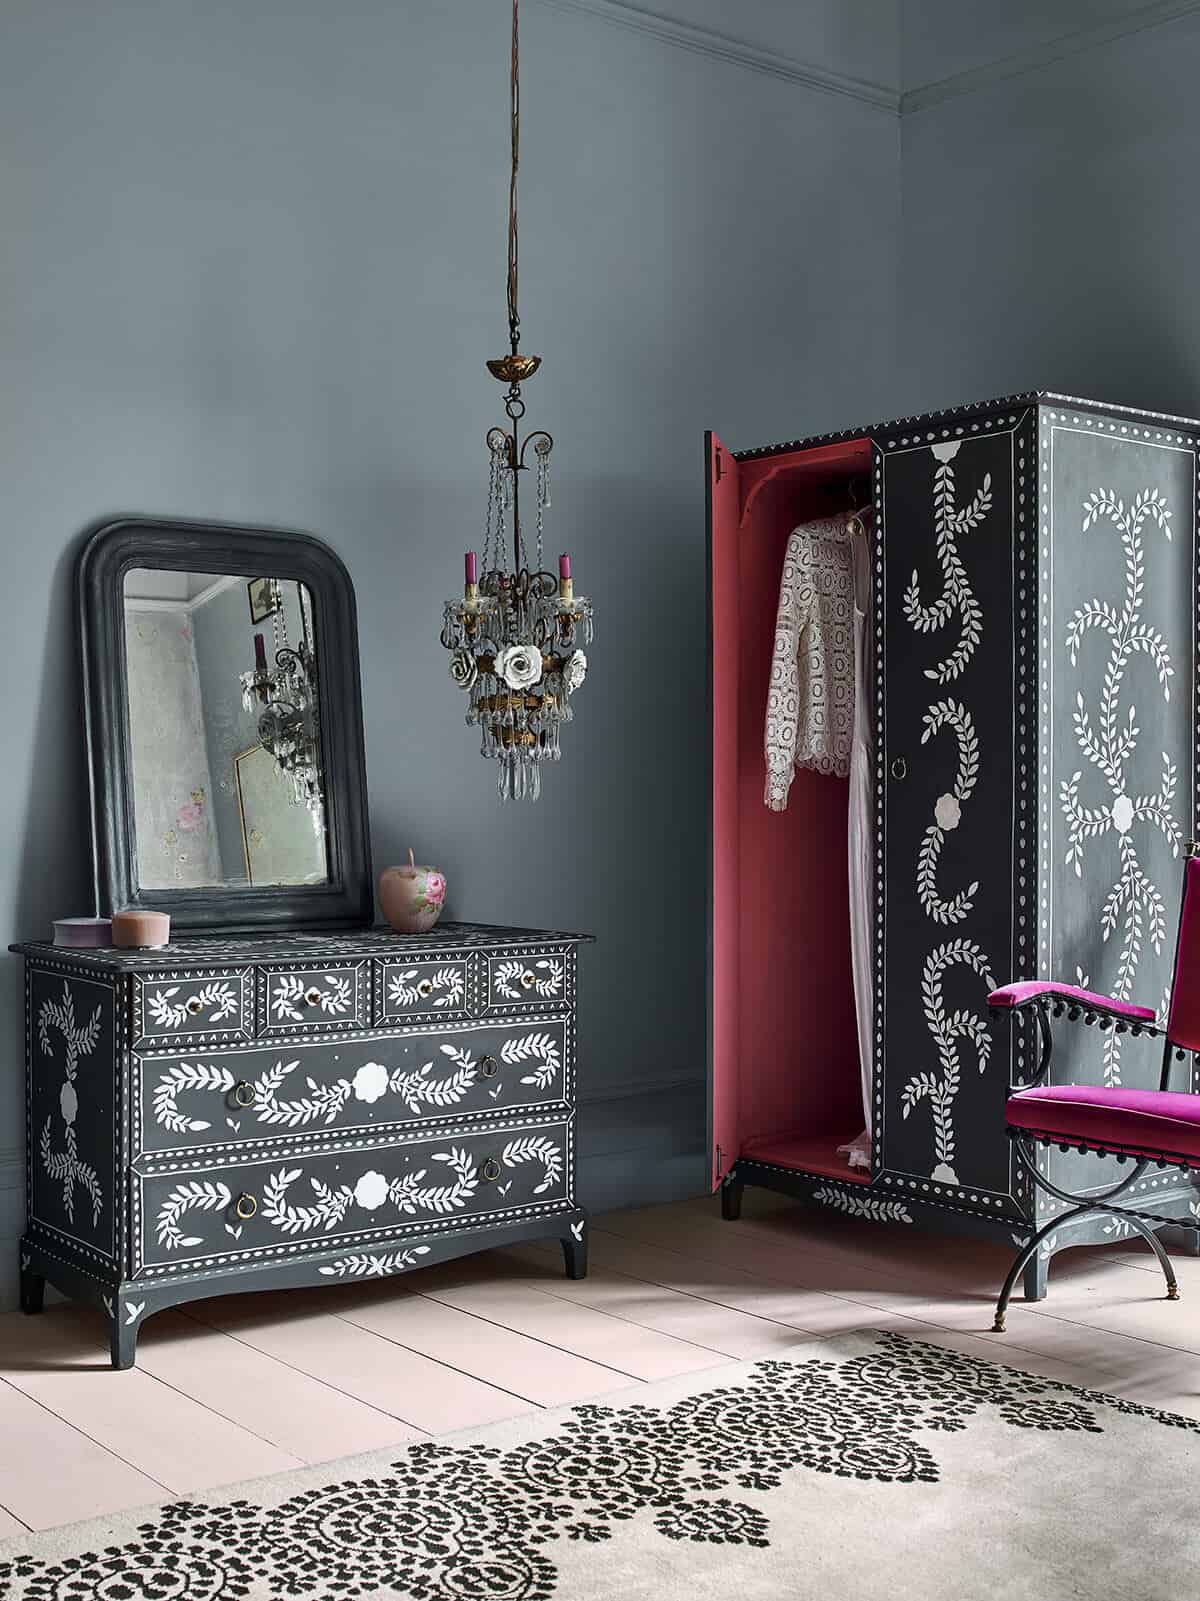 A wardrobe and a chest of drawers that have been painted in black chalk paint by Annie Sloan with white botanical patterns stencilled onto them